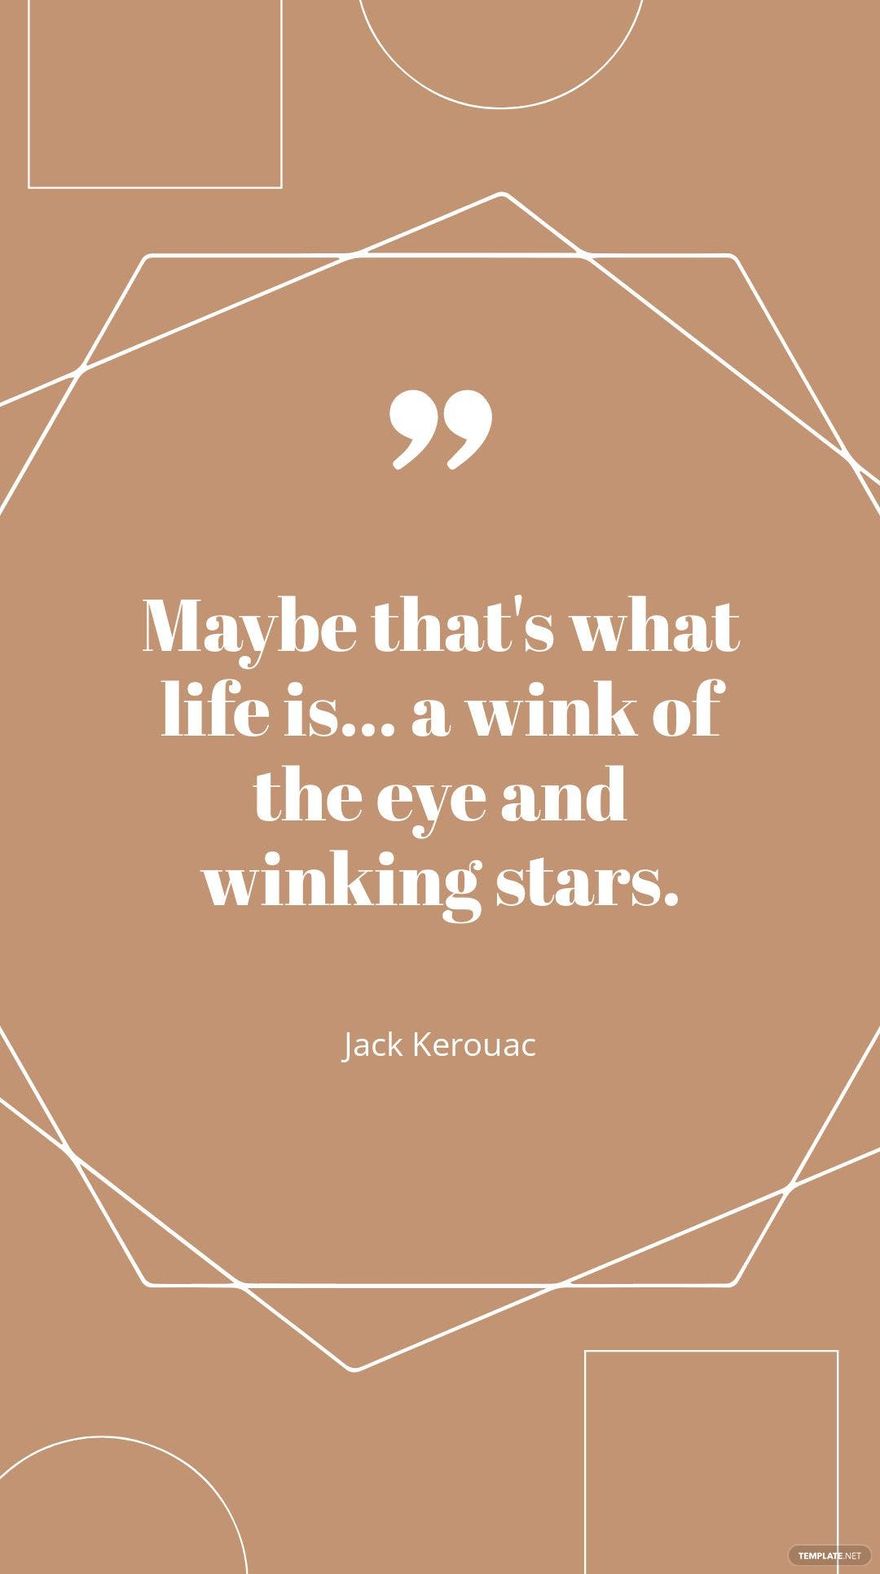 Jack Kerouac - "Maybe that's what life is... a wink of the eye and winking stars."